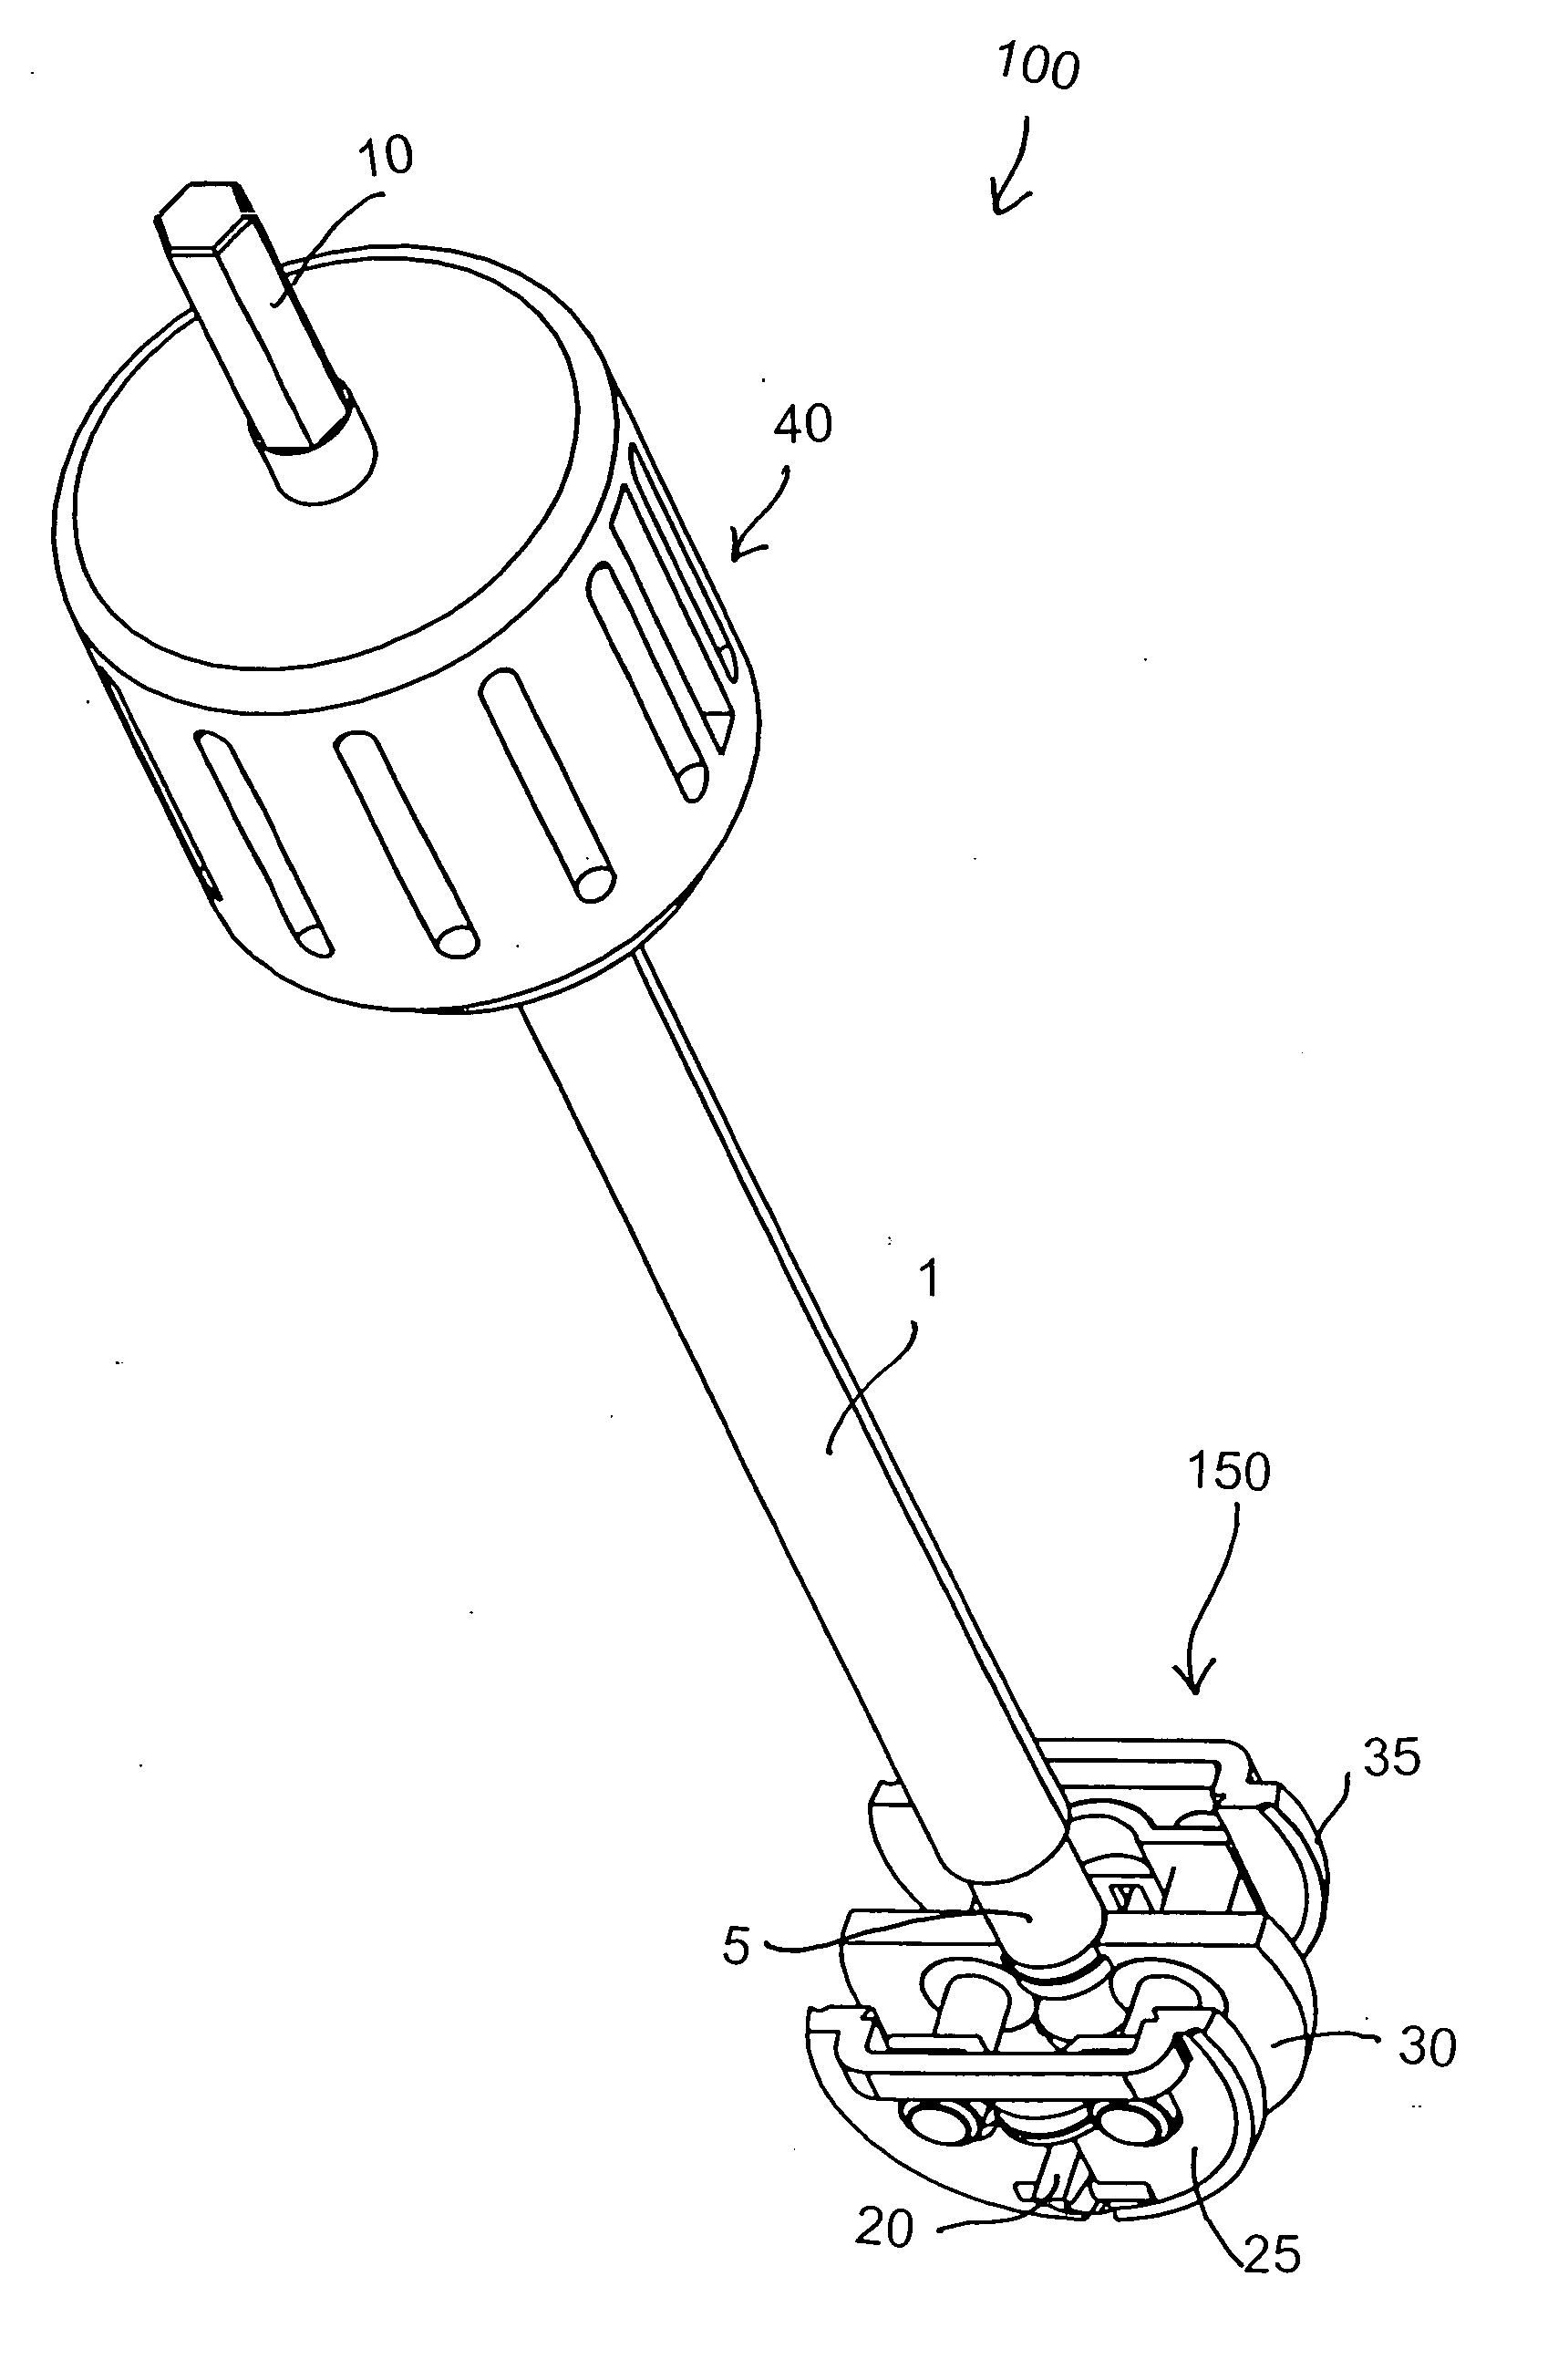 Expandable reaming device